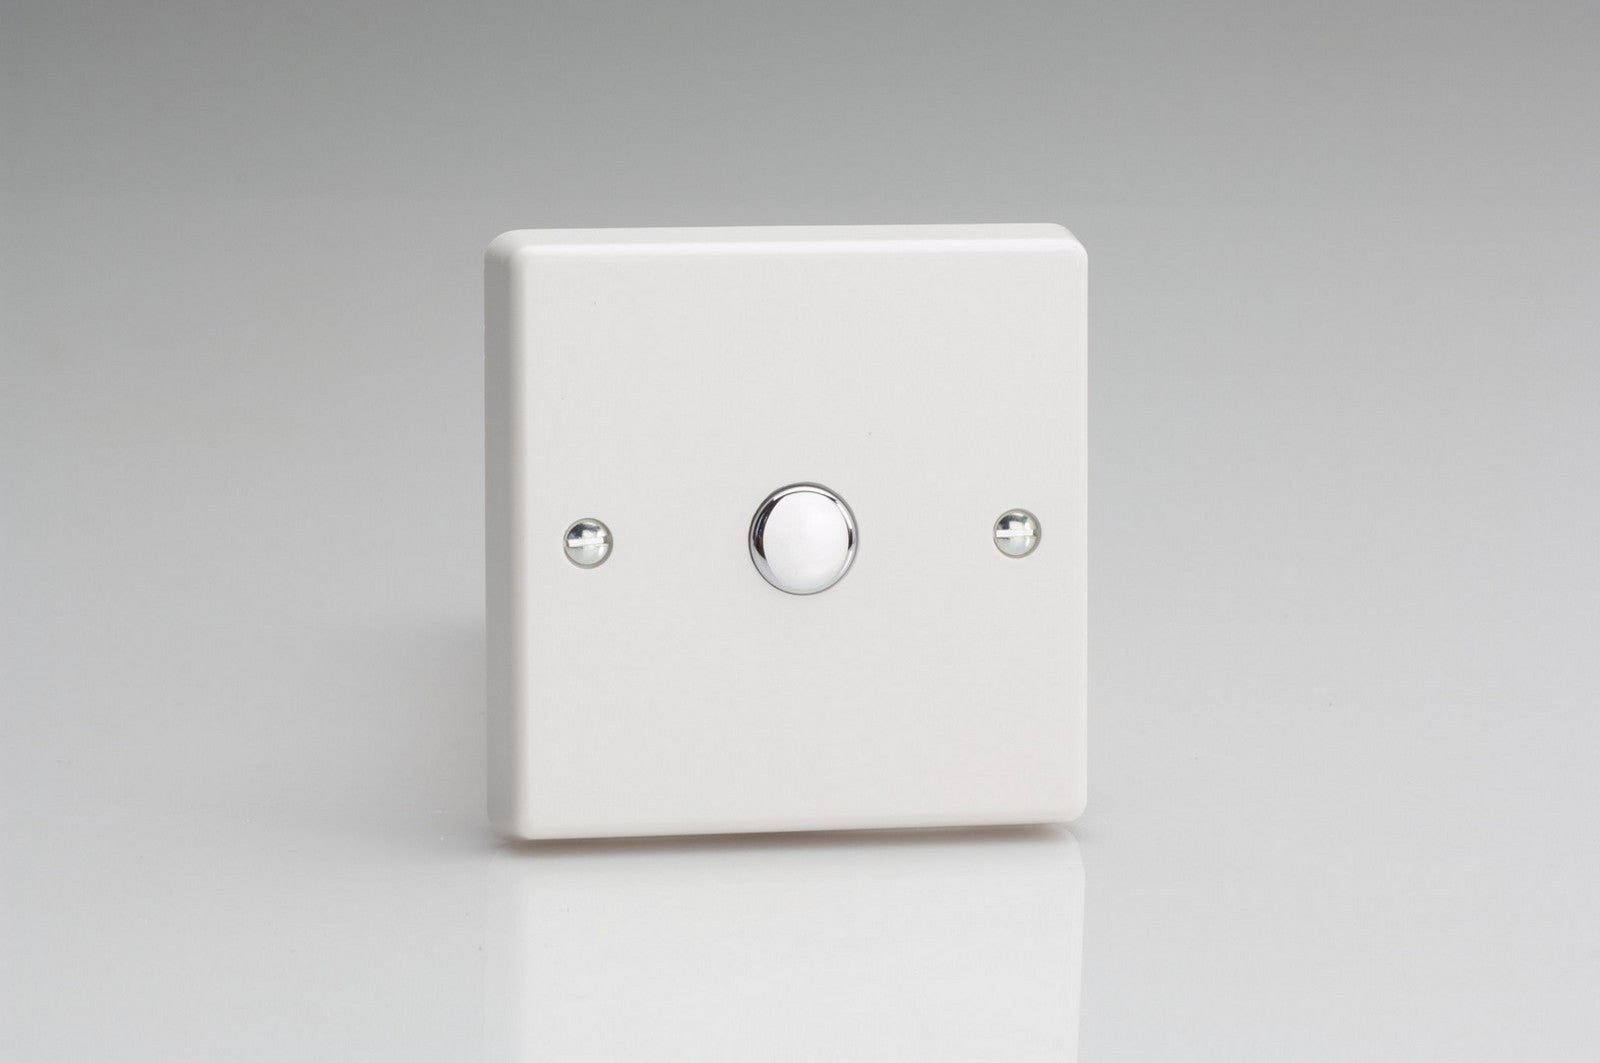 Varilight IQS001 White White Plastic 1-Gang Touch Control Dimming Slave for use with Master on 2-Way Circuits